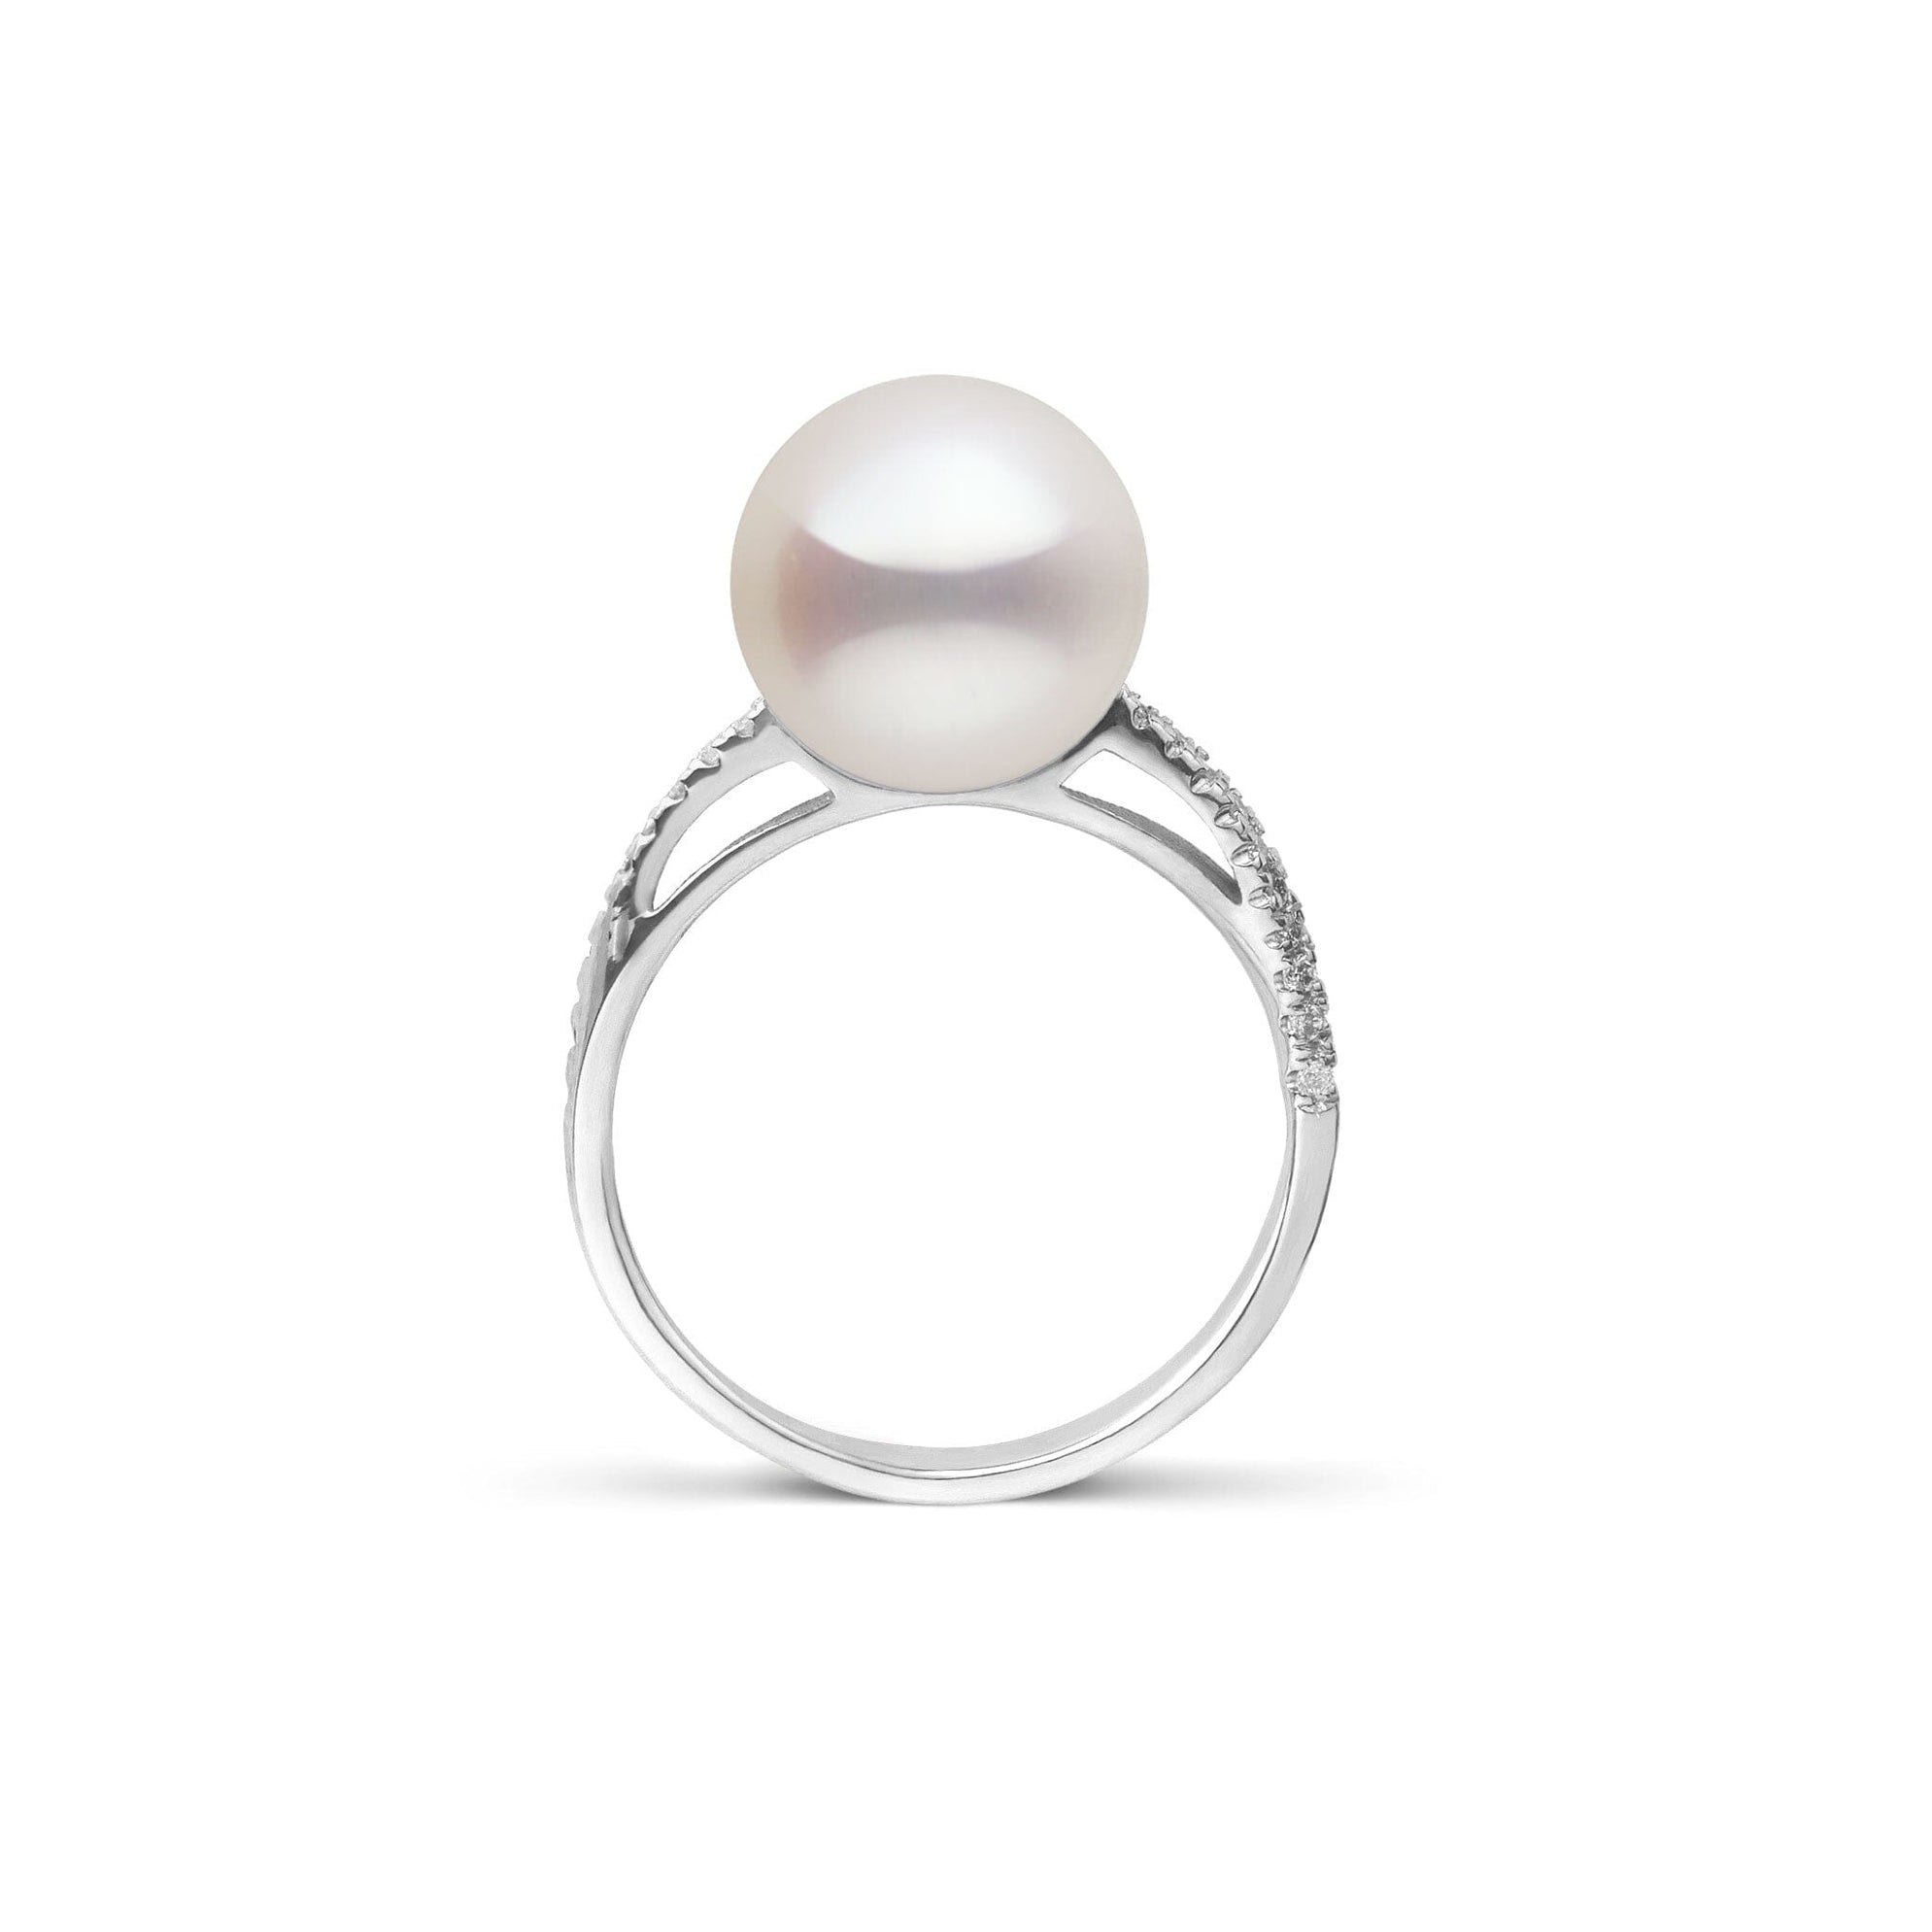 Mikimoto South Sea Pearl Rose Gold Diamond Flower Bypass Ring